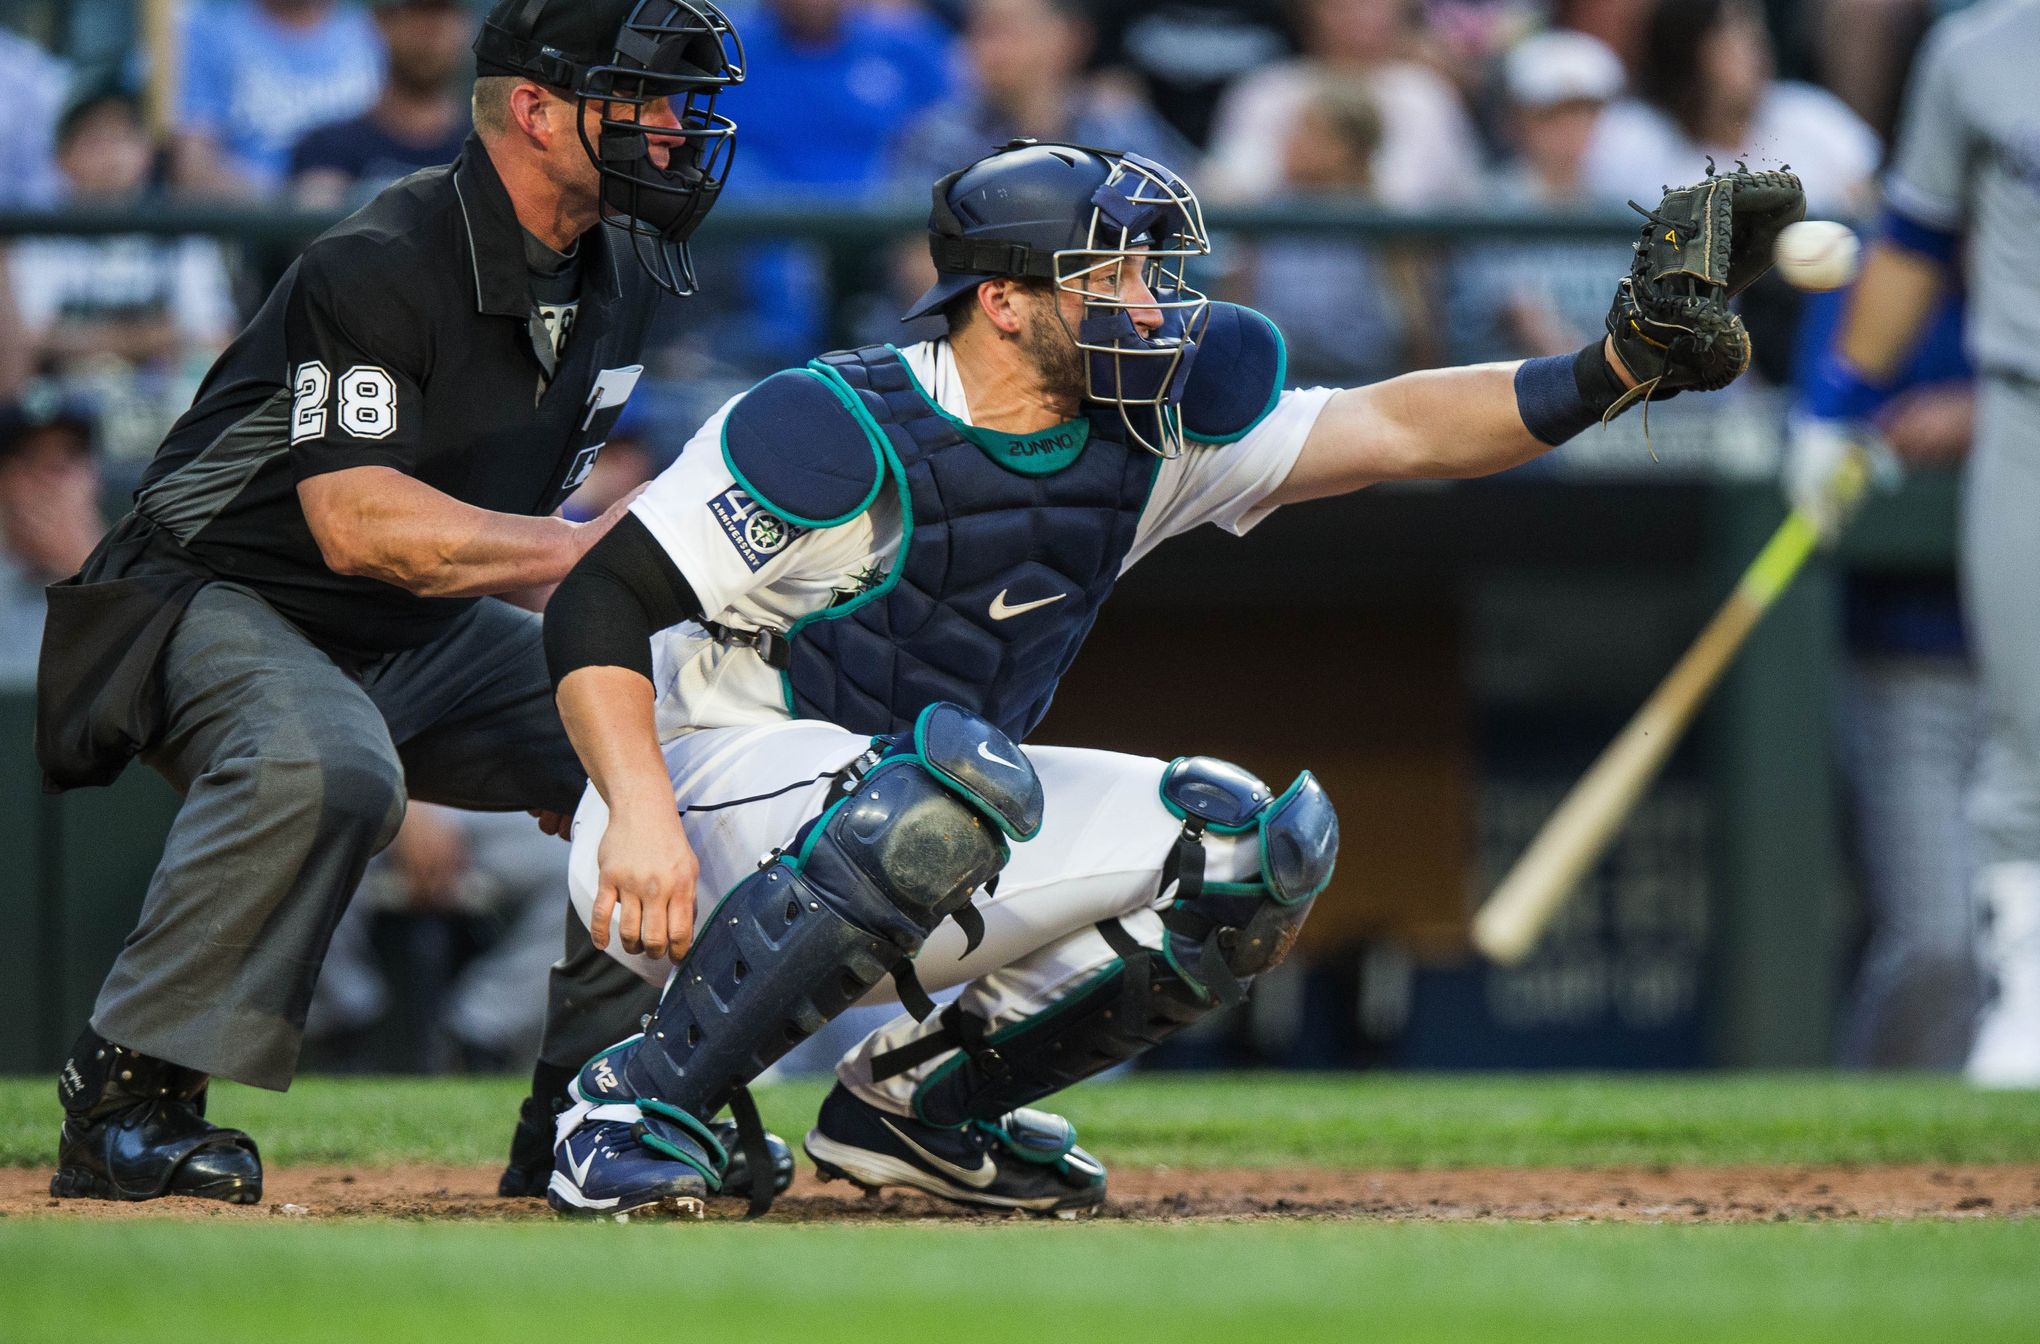 Mariners catcher Mike Zunino cleans up minor defensive issues